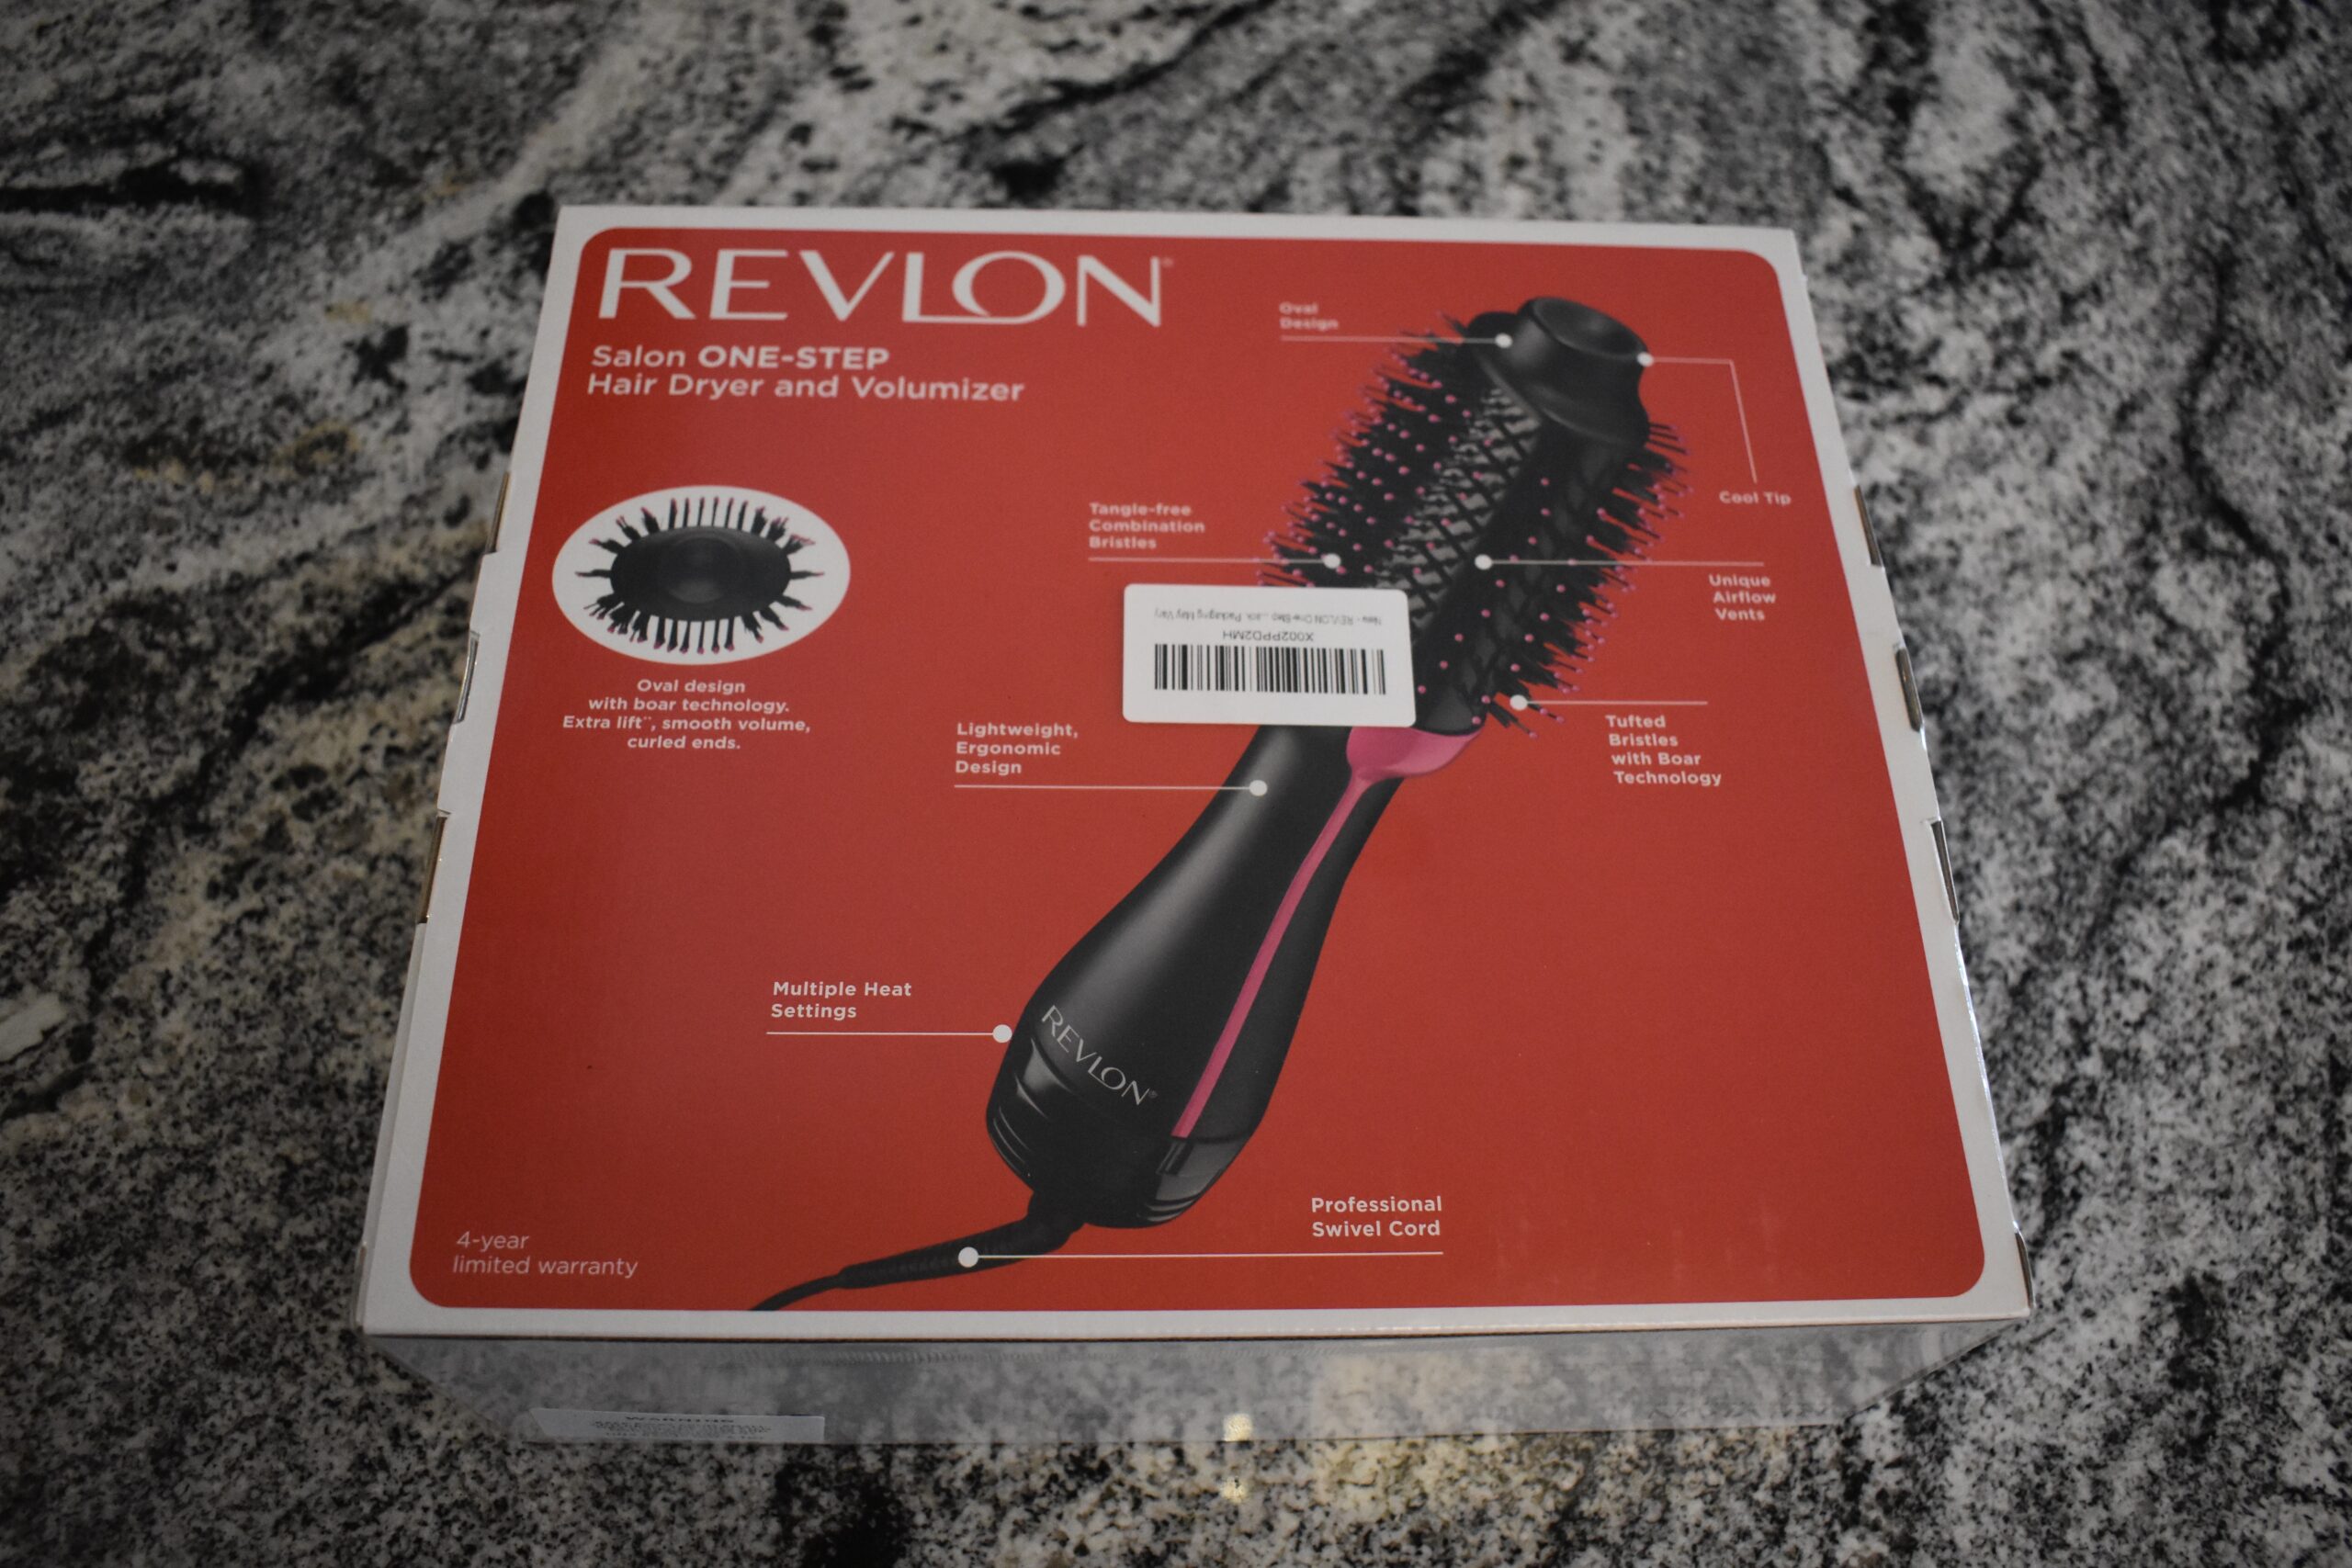 The Revlon hair dryer brush and its features on the back of the box